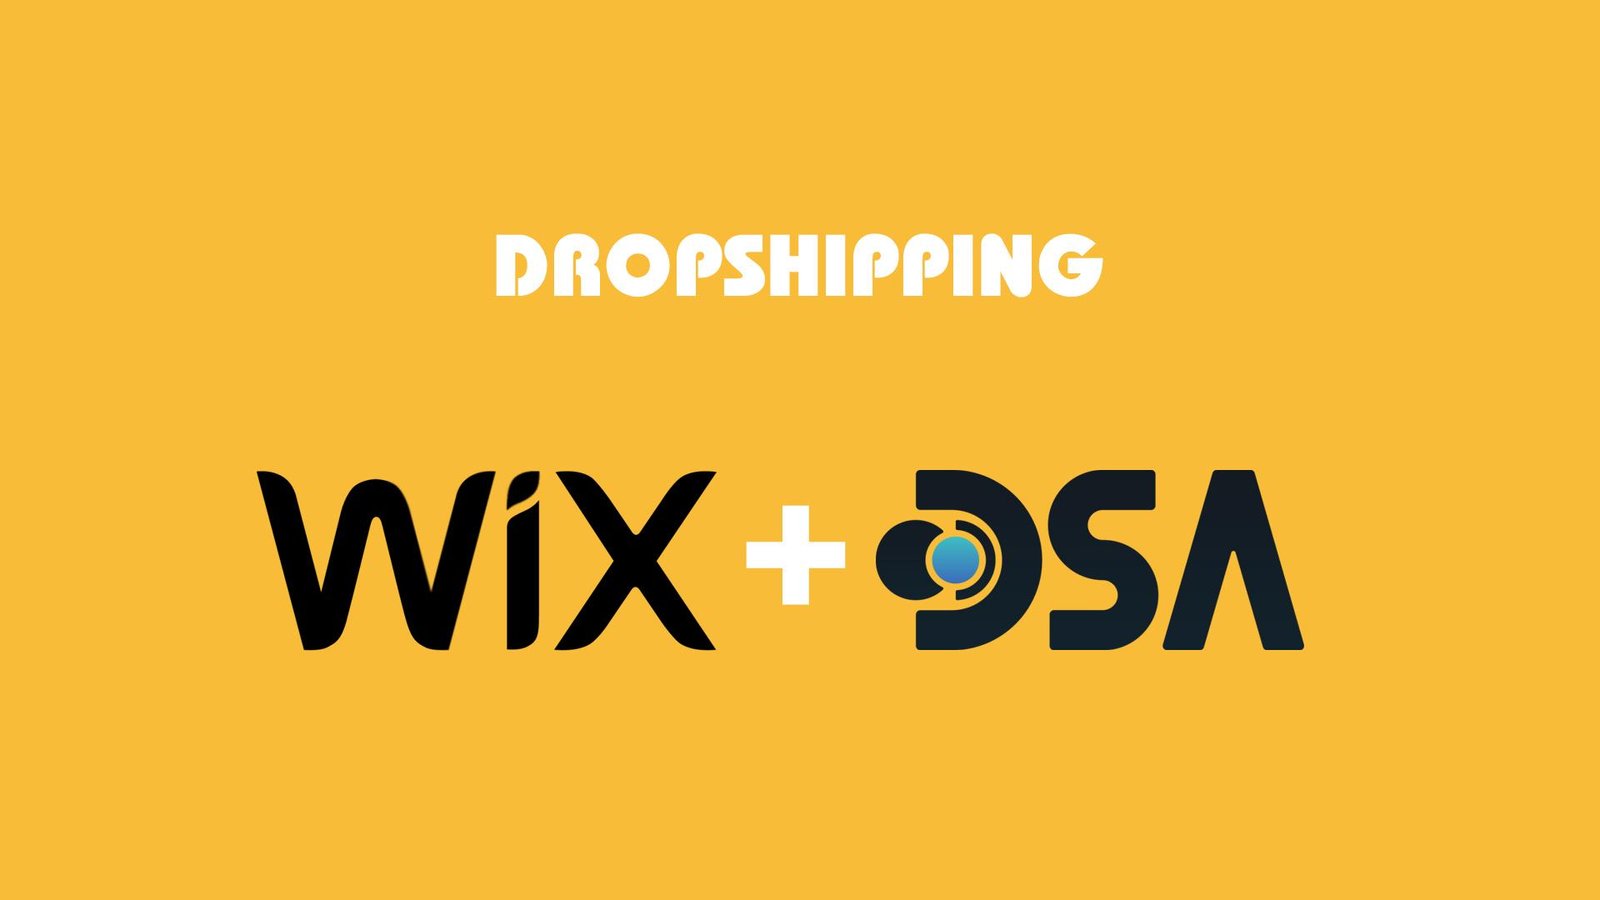 How to import products from Aliexpress to Wix store?